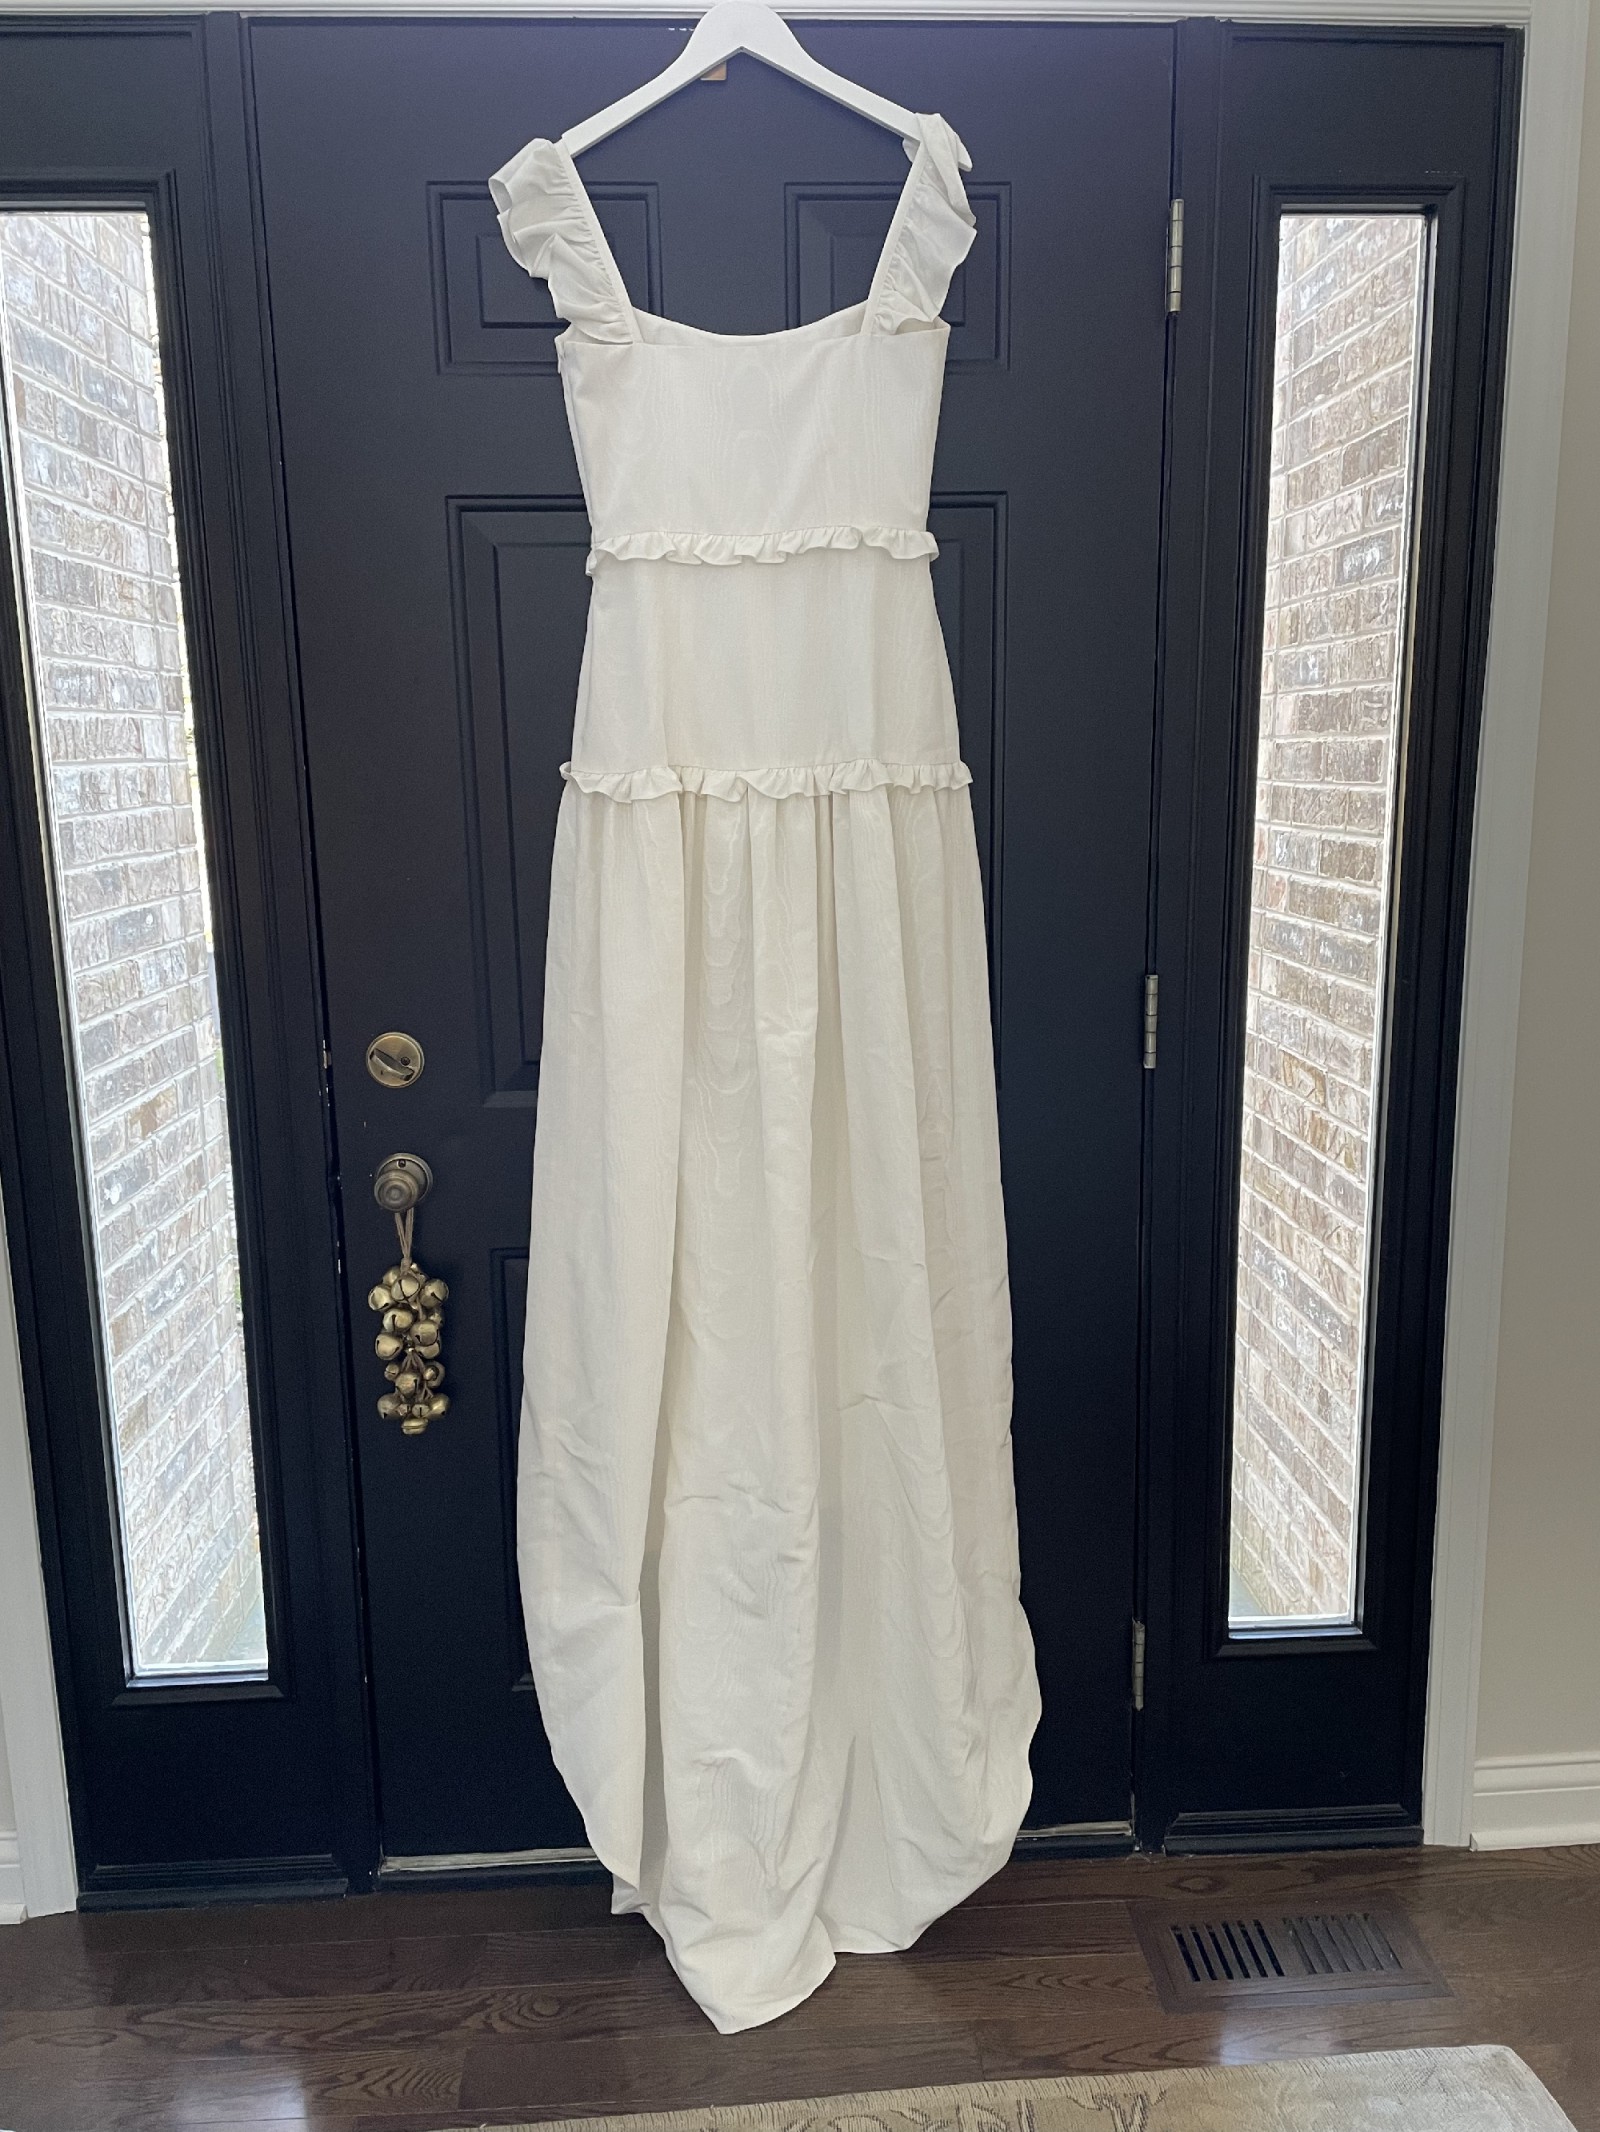 Markarian Arabella Ivory Moire Faille Gown New Wedding Dress Save 25% ...